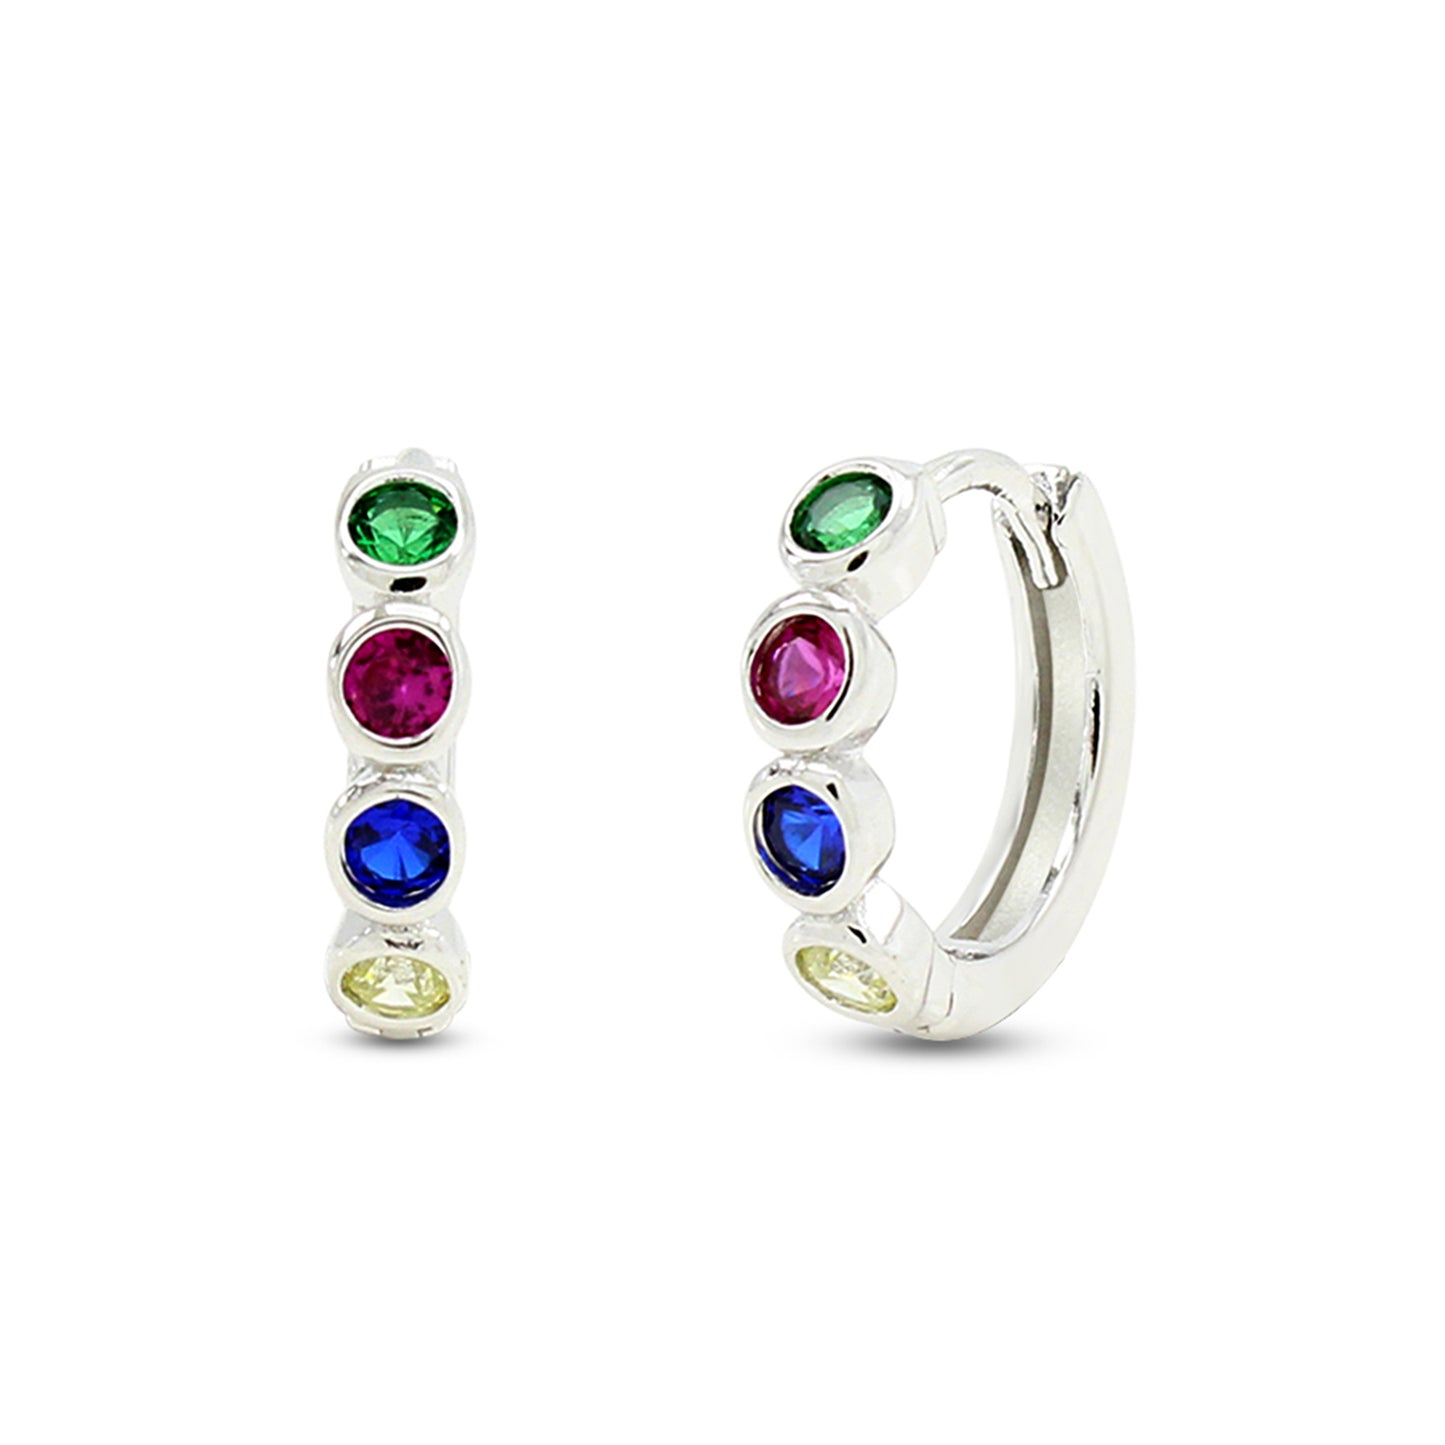 Round Colourful Rainbow Cubic Zirconia Bezel Set Hoop Earrings For Women In 14K White Gold Plated 925 Sterling Silver